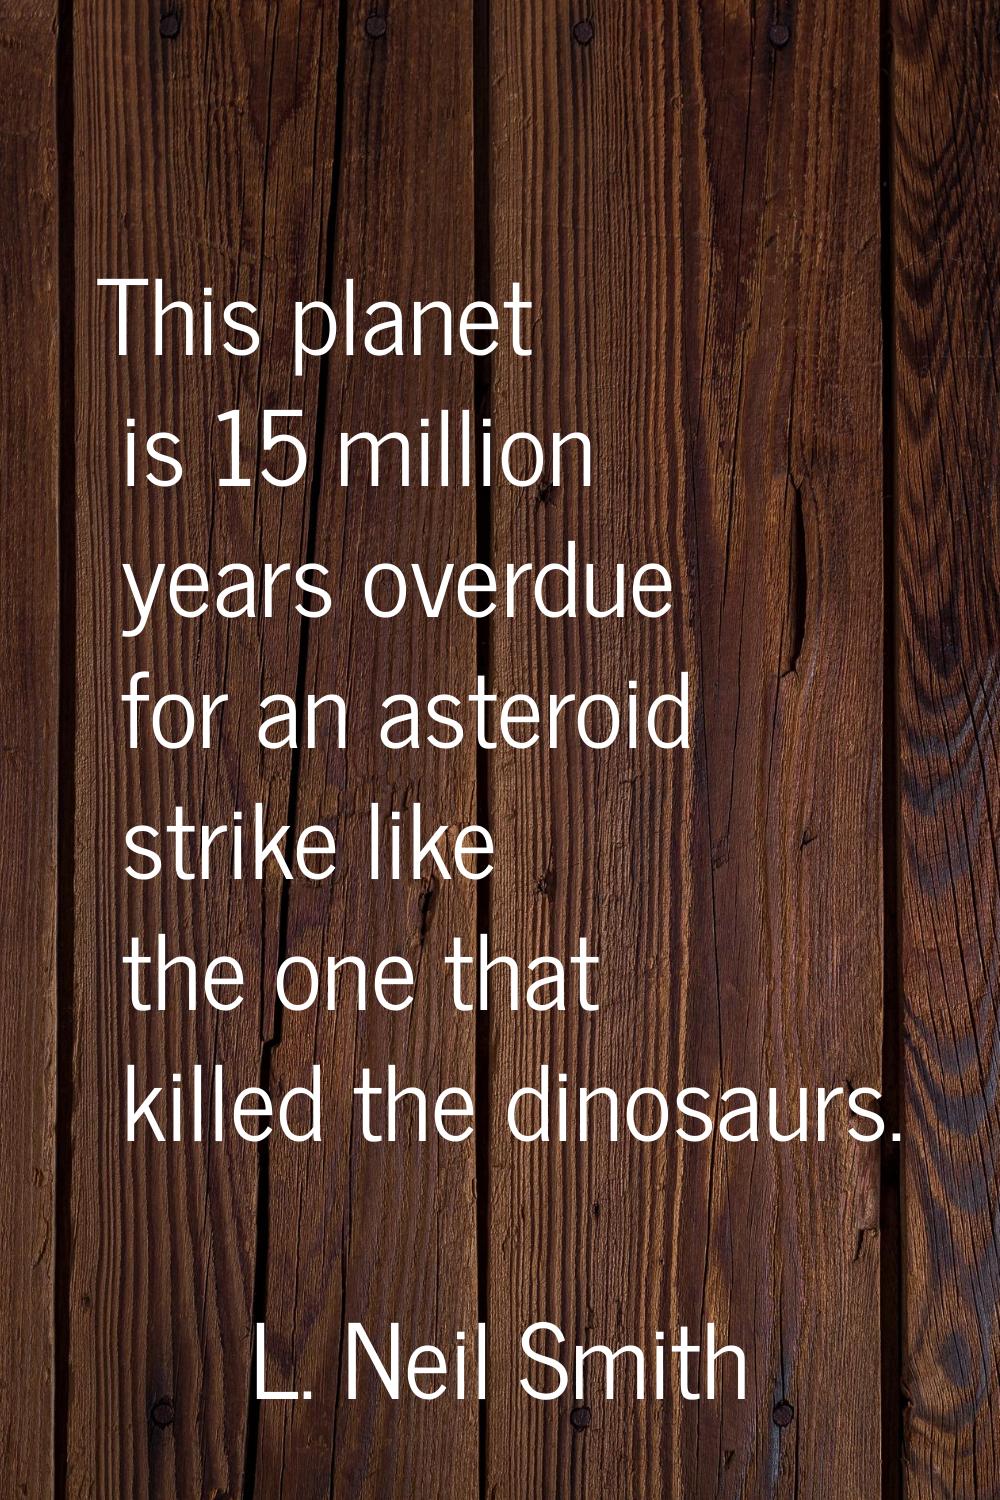 This planet is 15 million years overdue for an asteroid strike like the one that killed the dinosau